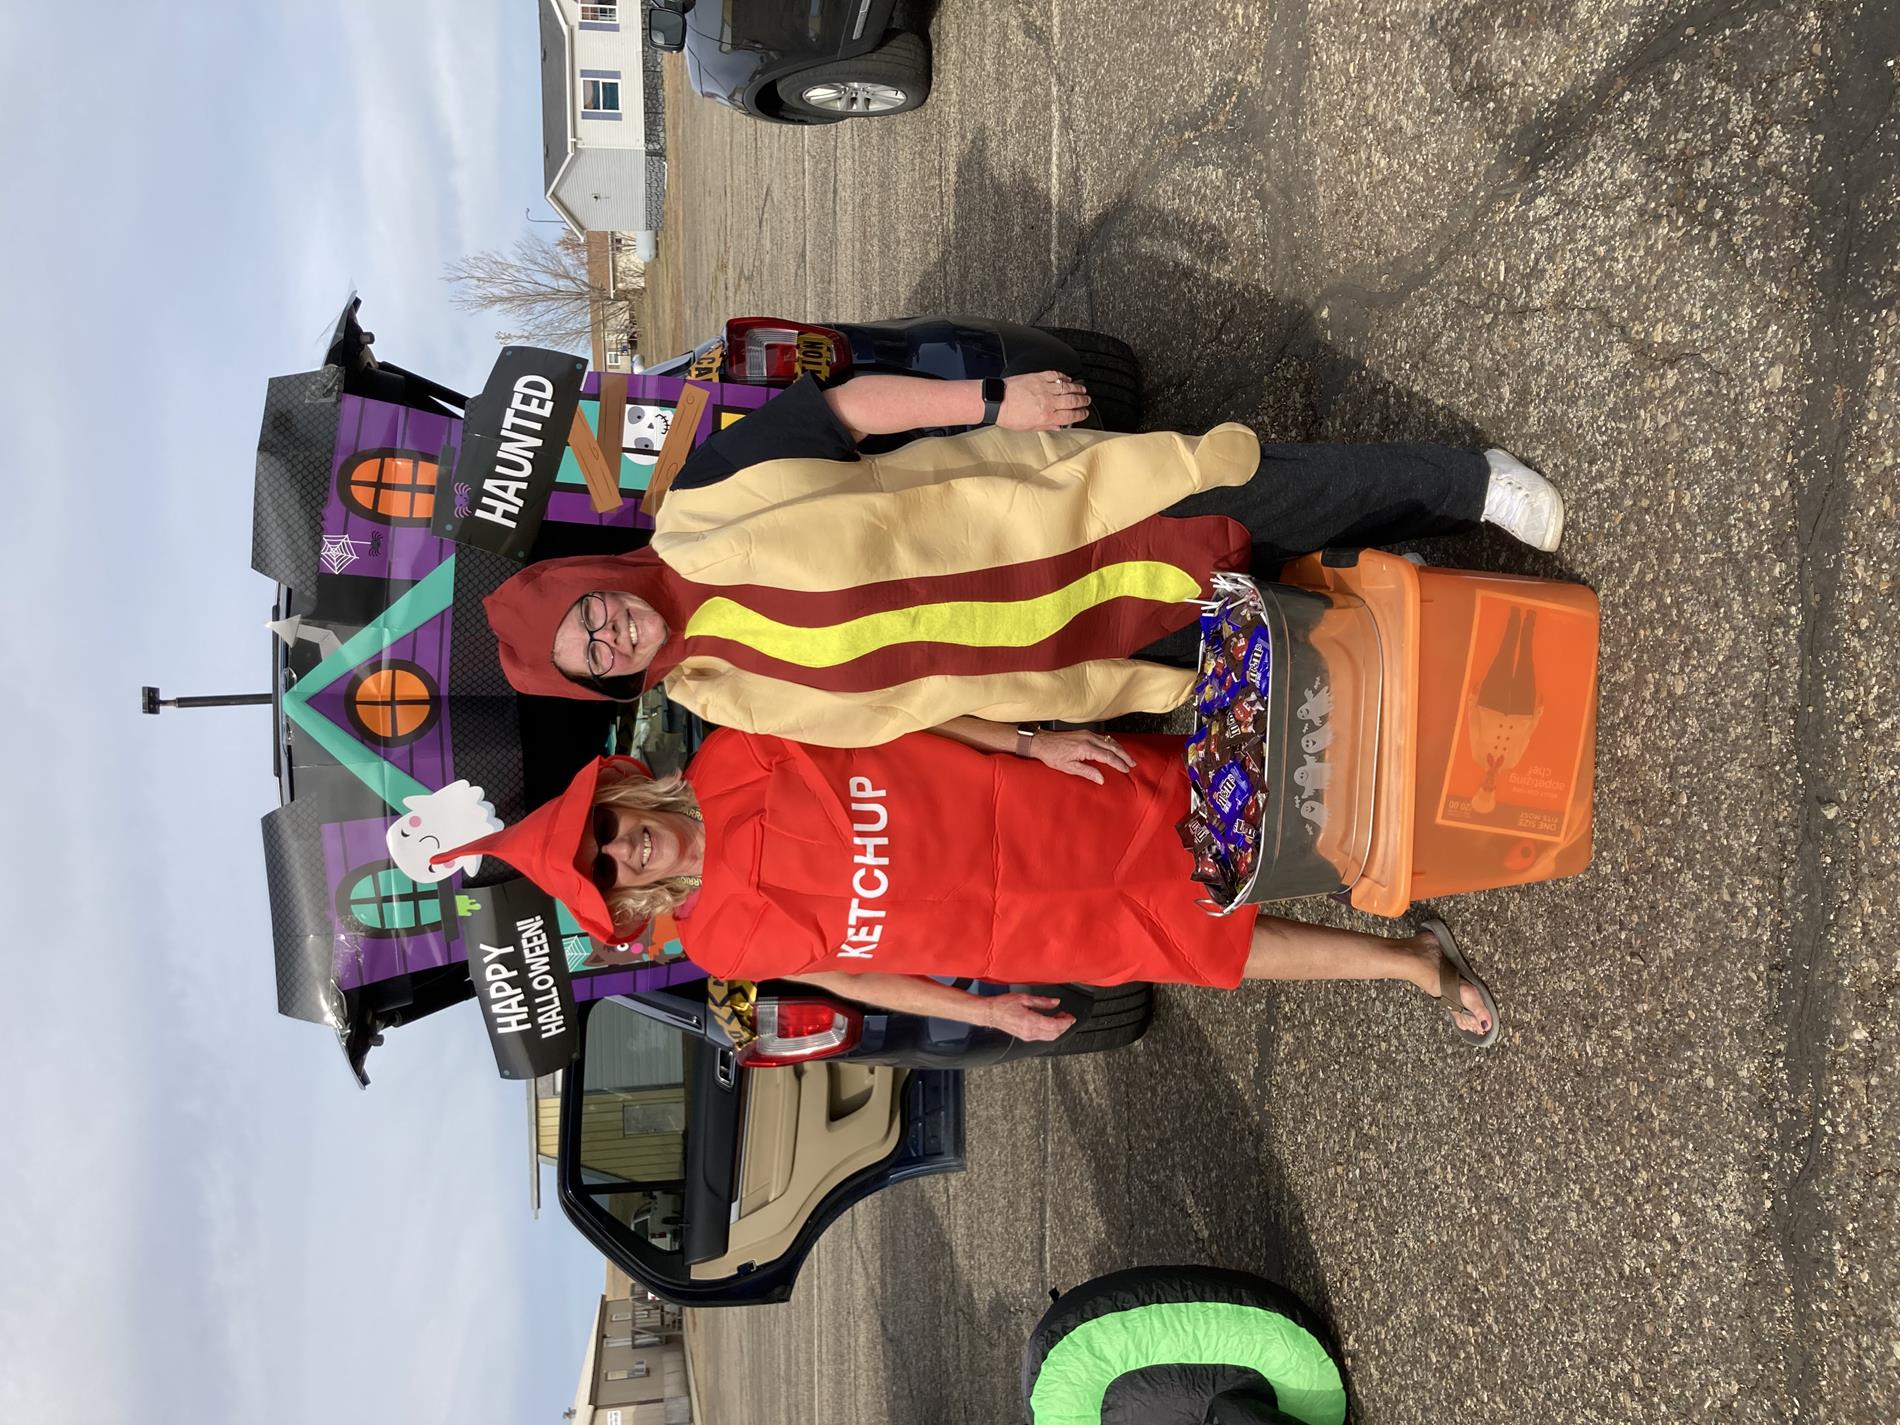 Staff dressed up as hot dog and ketchup 